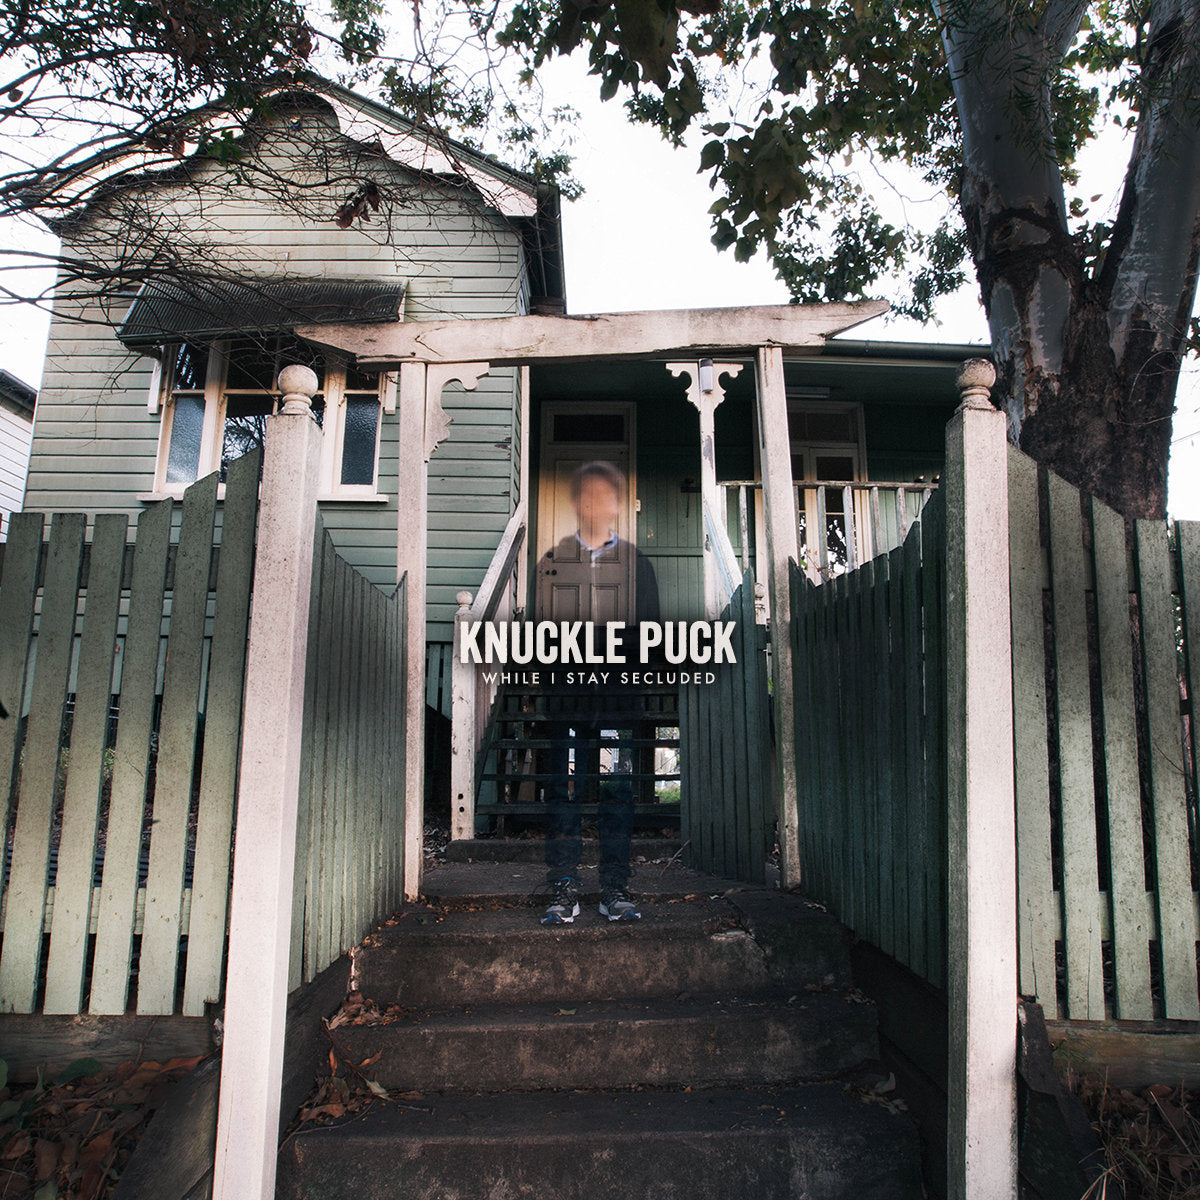 Knuckle Puck "While I Stay Secluded" CD